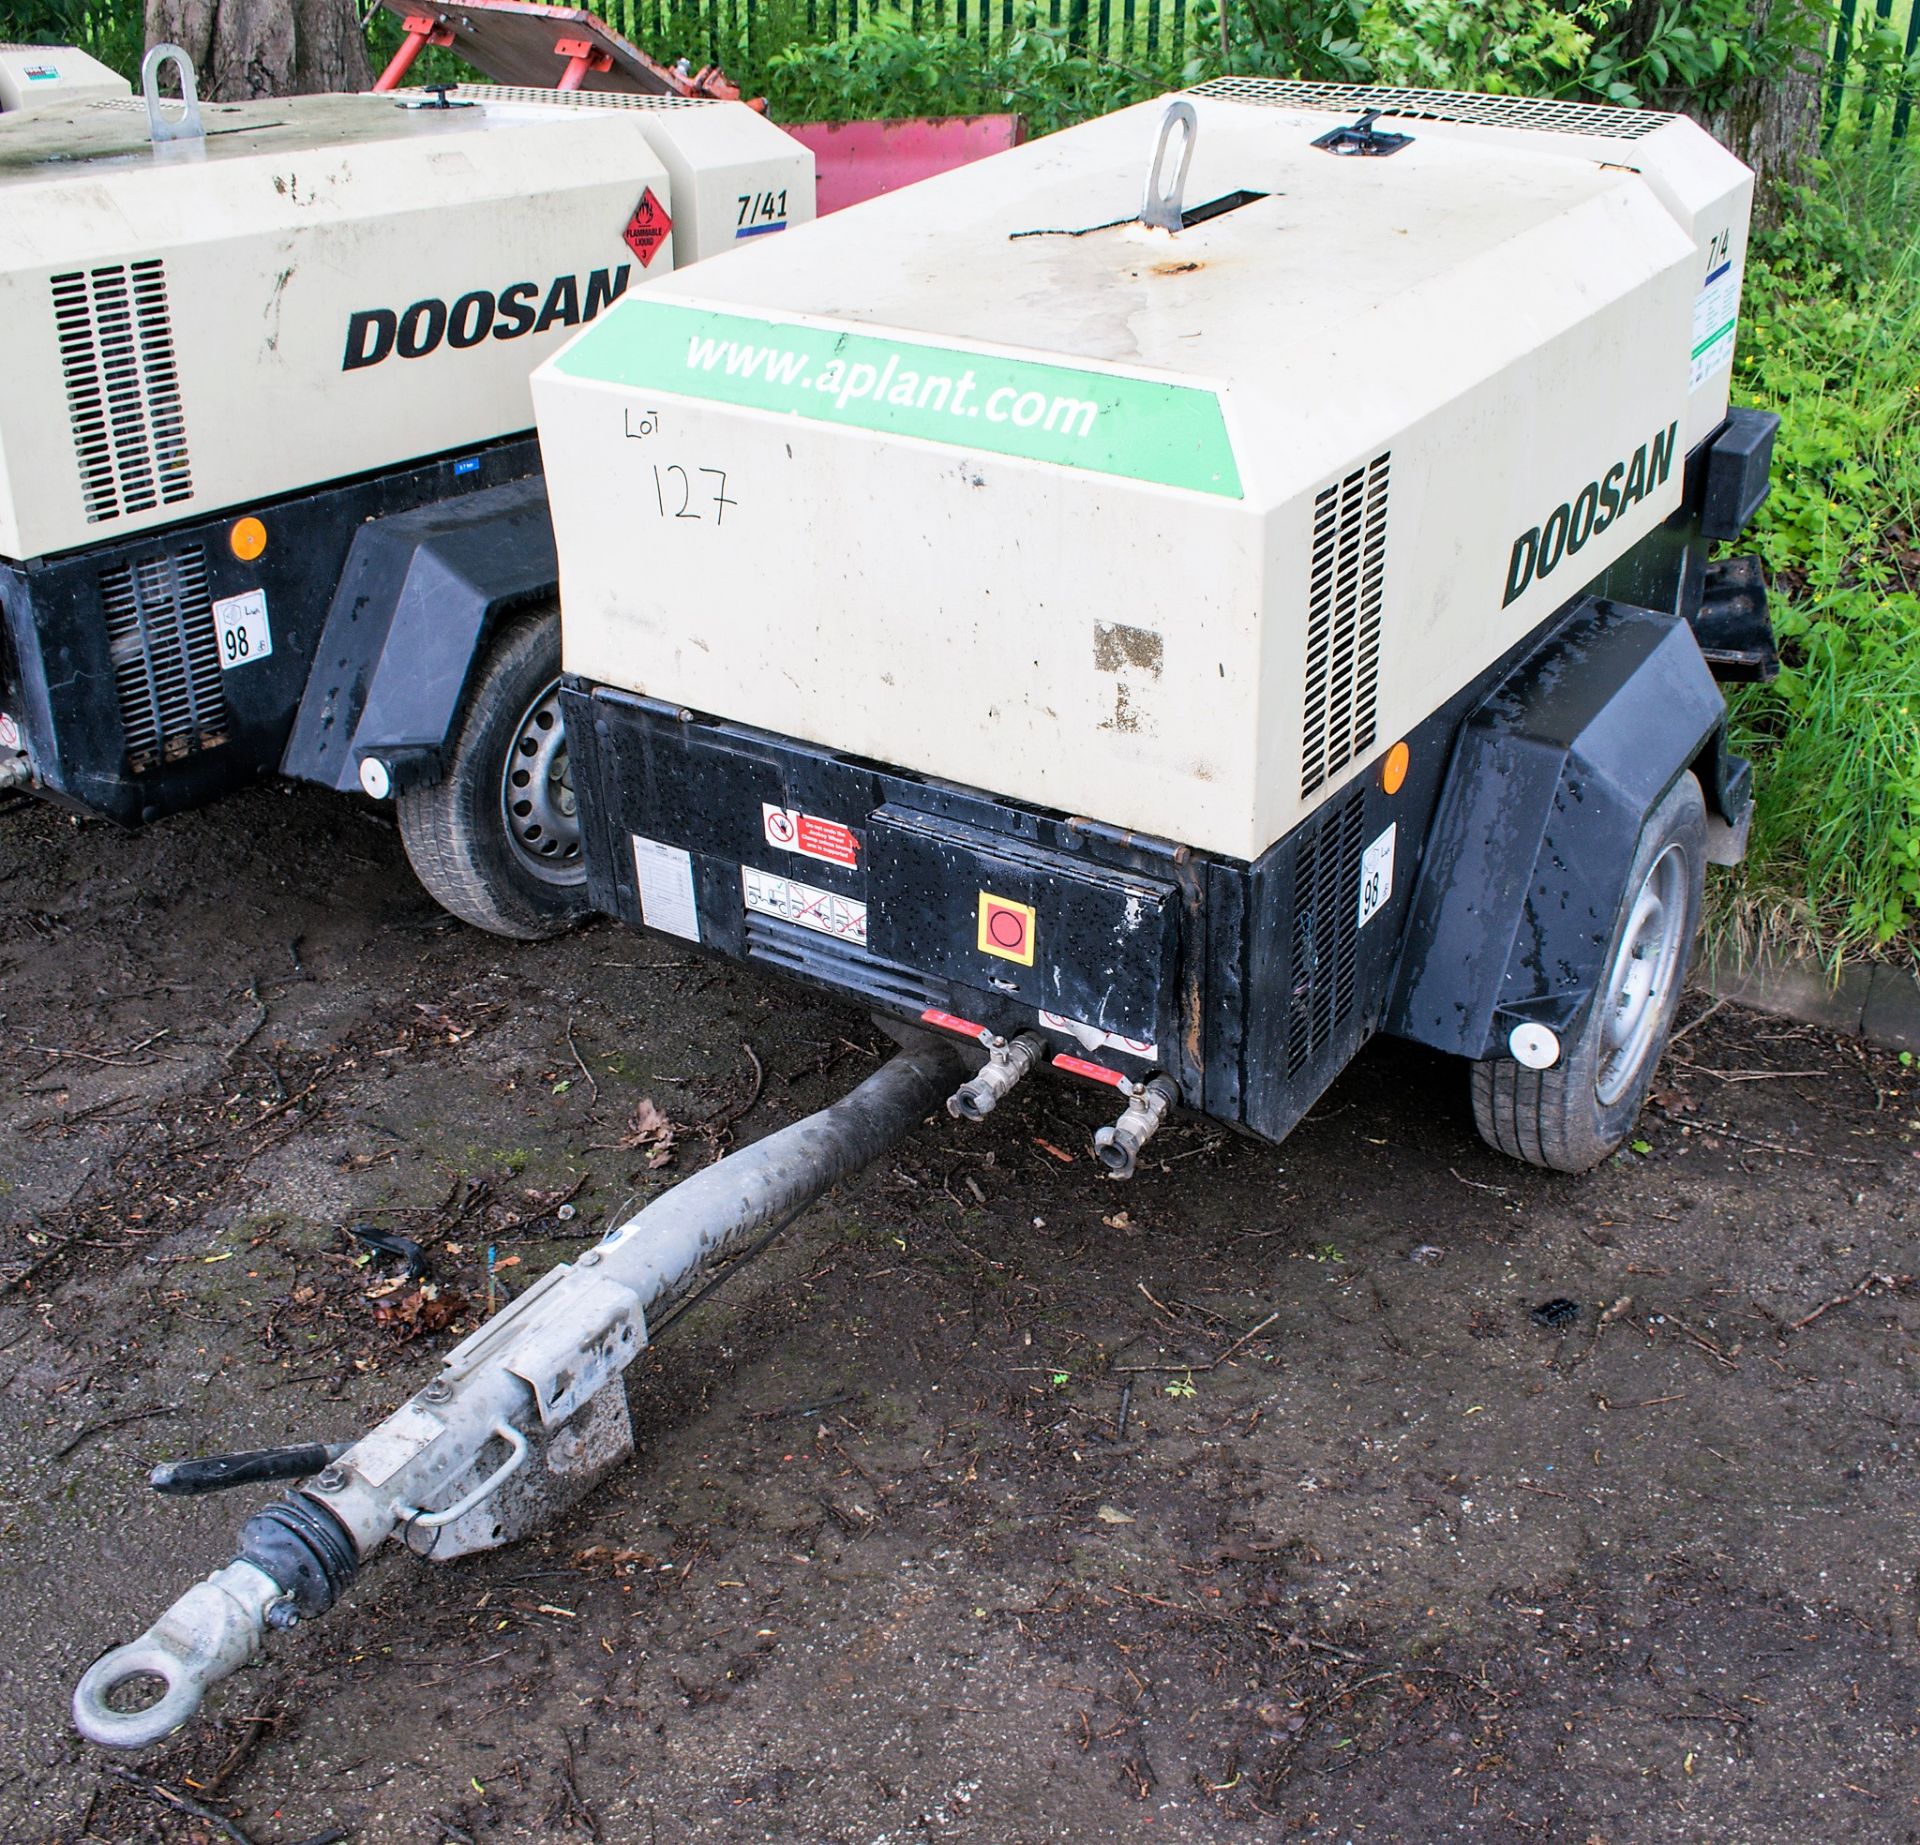 Doosan 7/41 diesel driven mobile air compressor Year: 2016 S/N: GY434182 Recorded Hours: 245